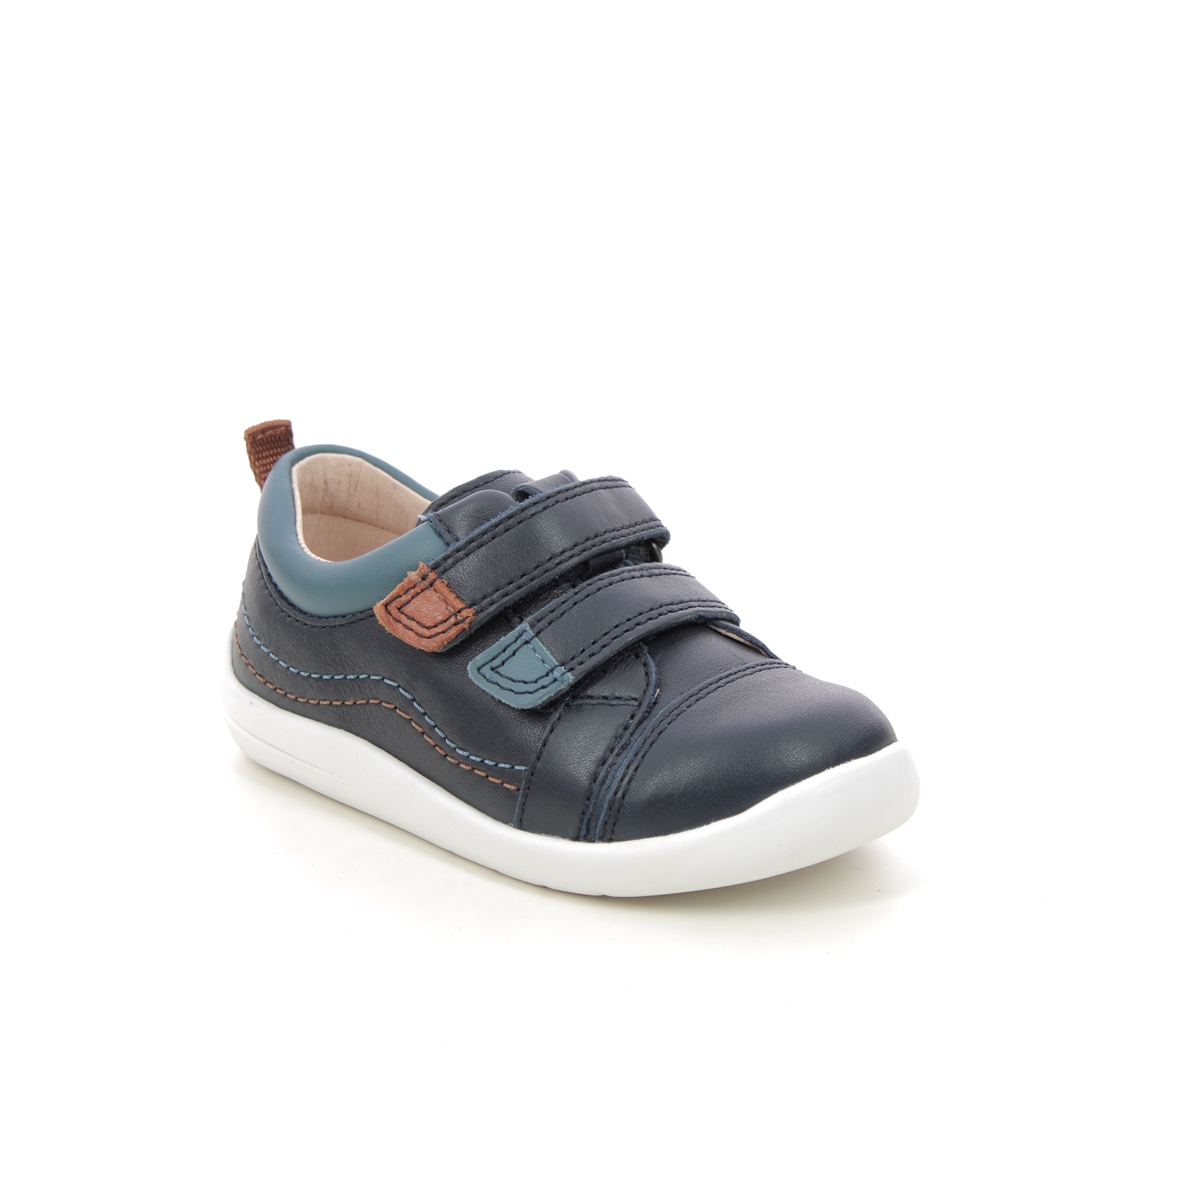 Start Rite - Clubhouse Jojo In Navy Leather 0800-96F In Size 4 In Plain Navy Leather Boys First And Toddler Shoes  In Navy Leather For kids